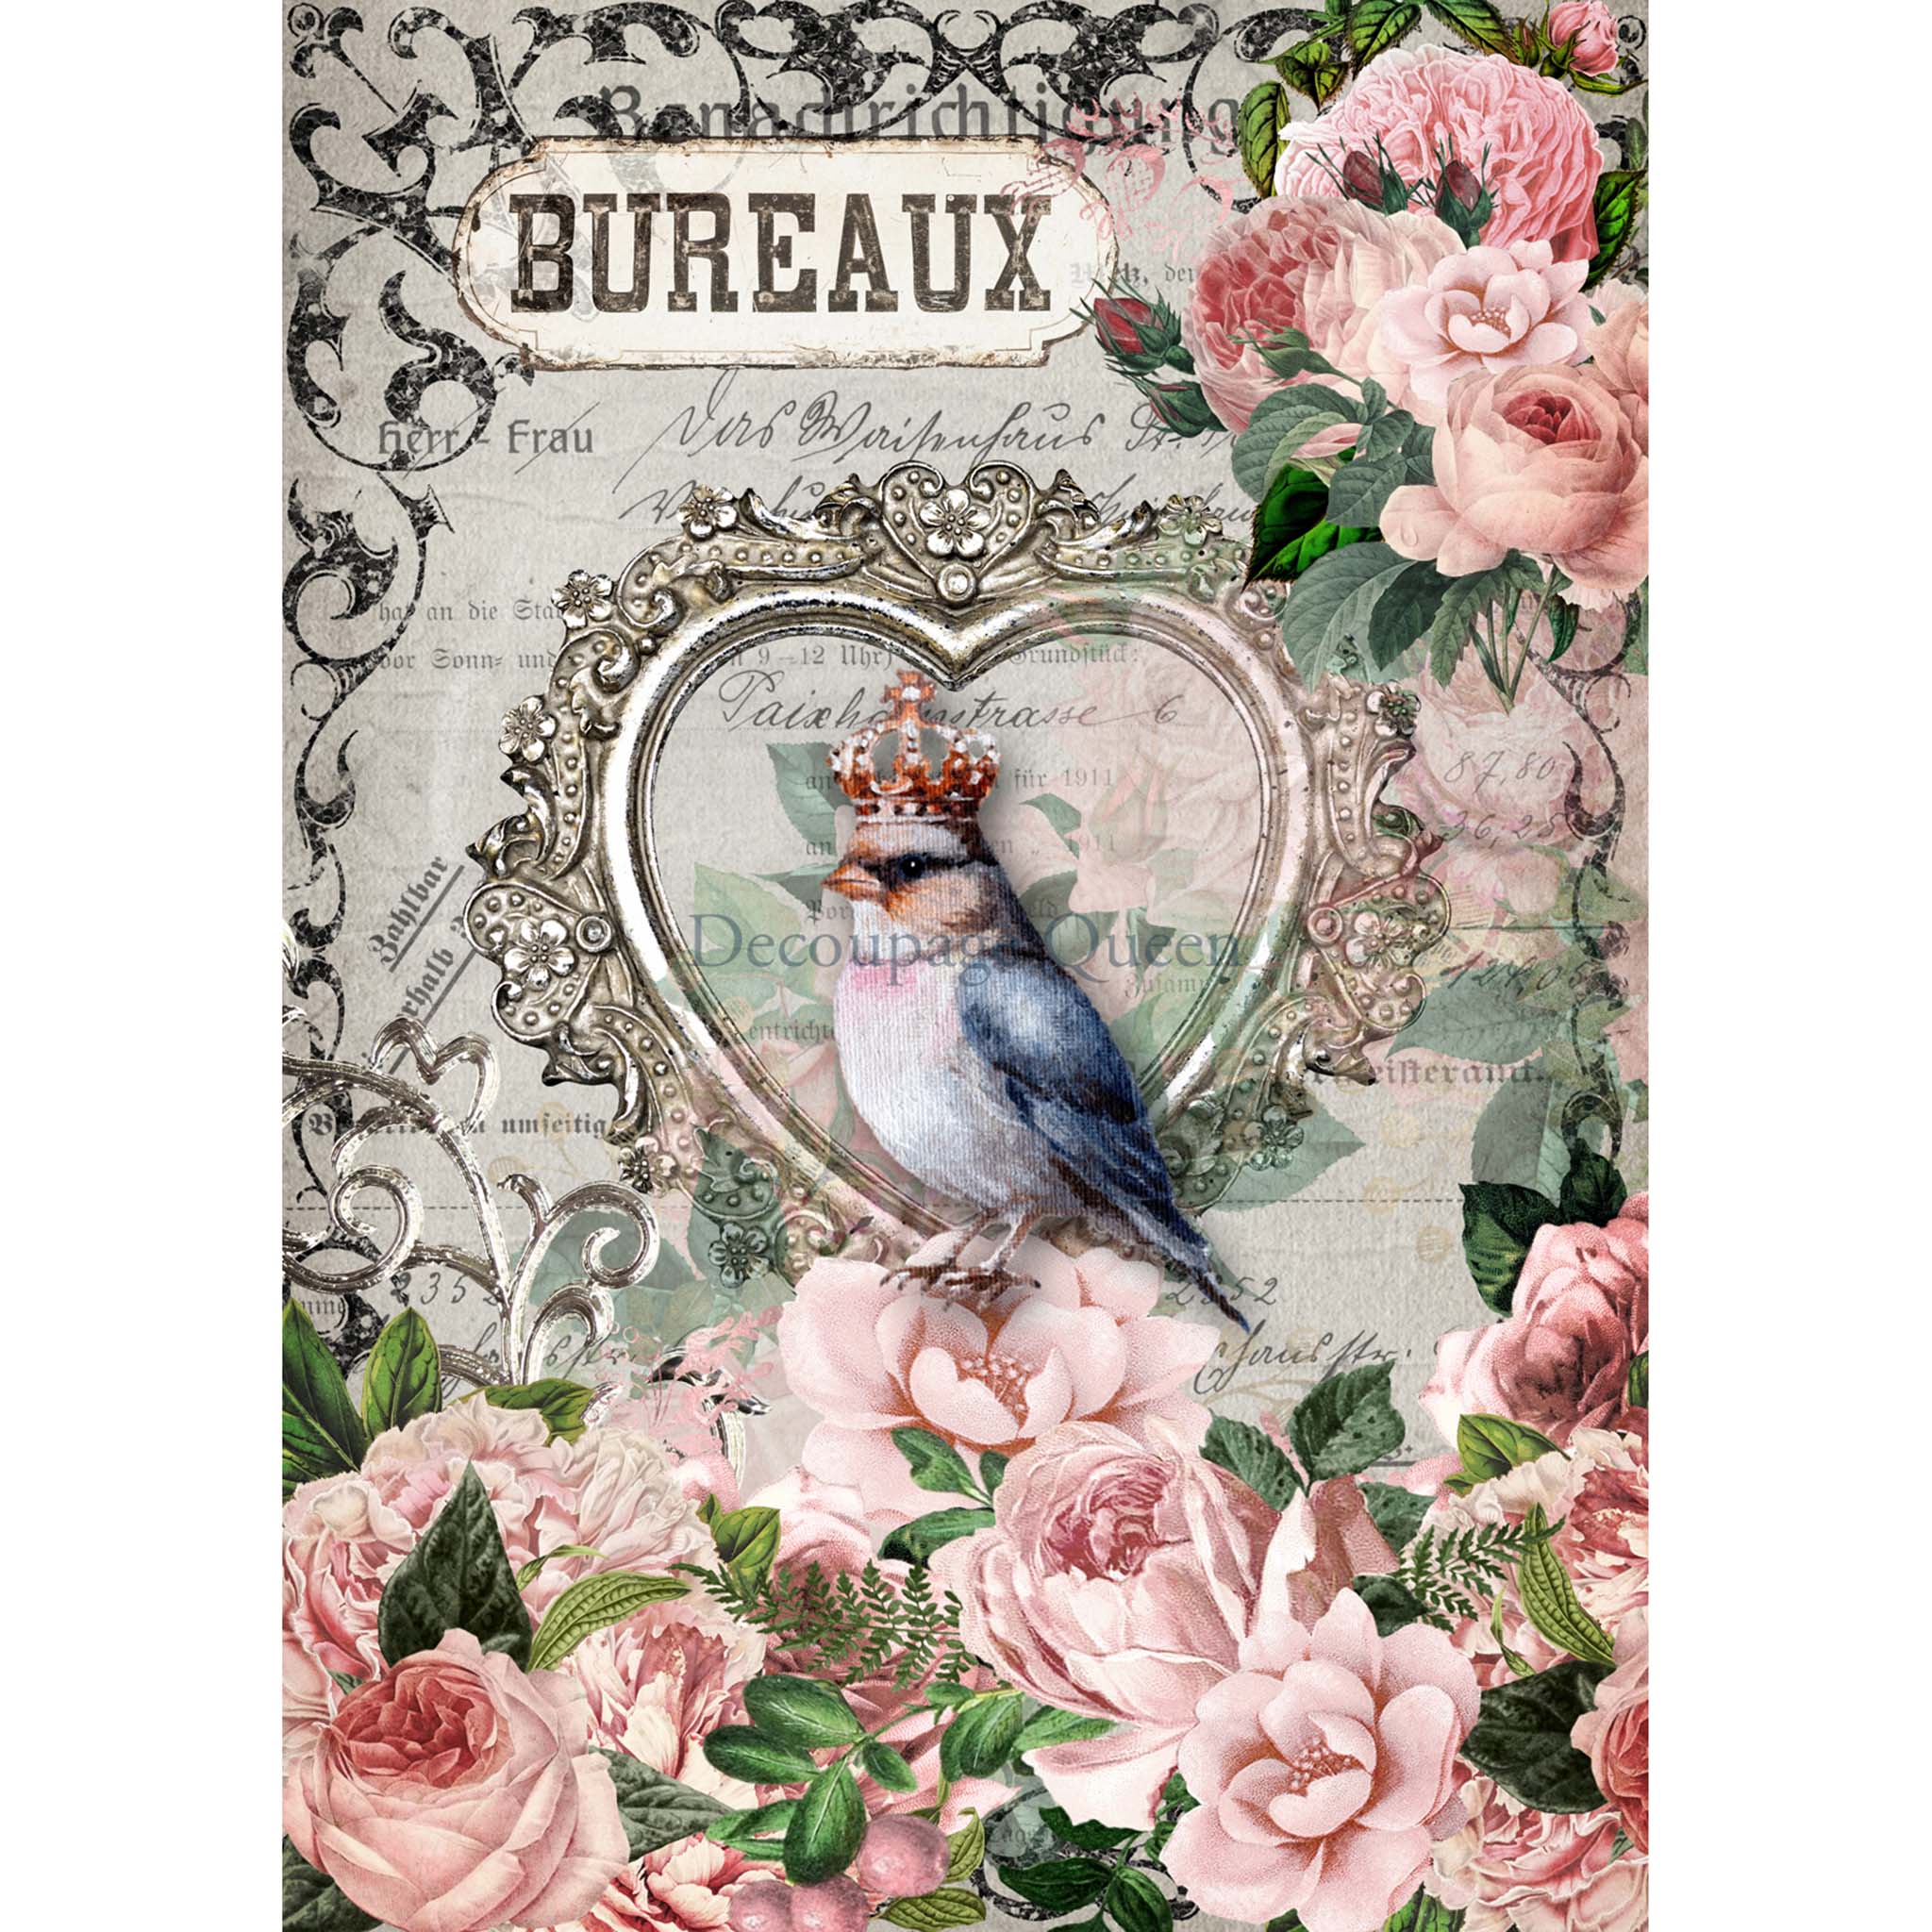 A3 rice paper design that features delicate pink roses, a charming bluebird wearing a crown while sitting in a heart picture frame, and a vintage French document. White borders are on the sides.